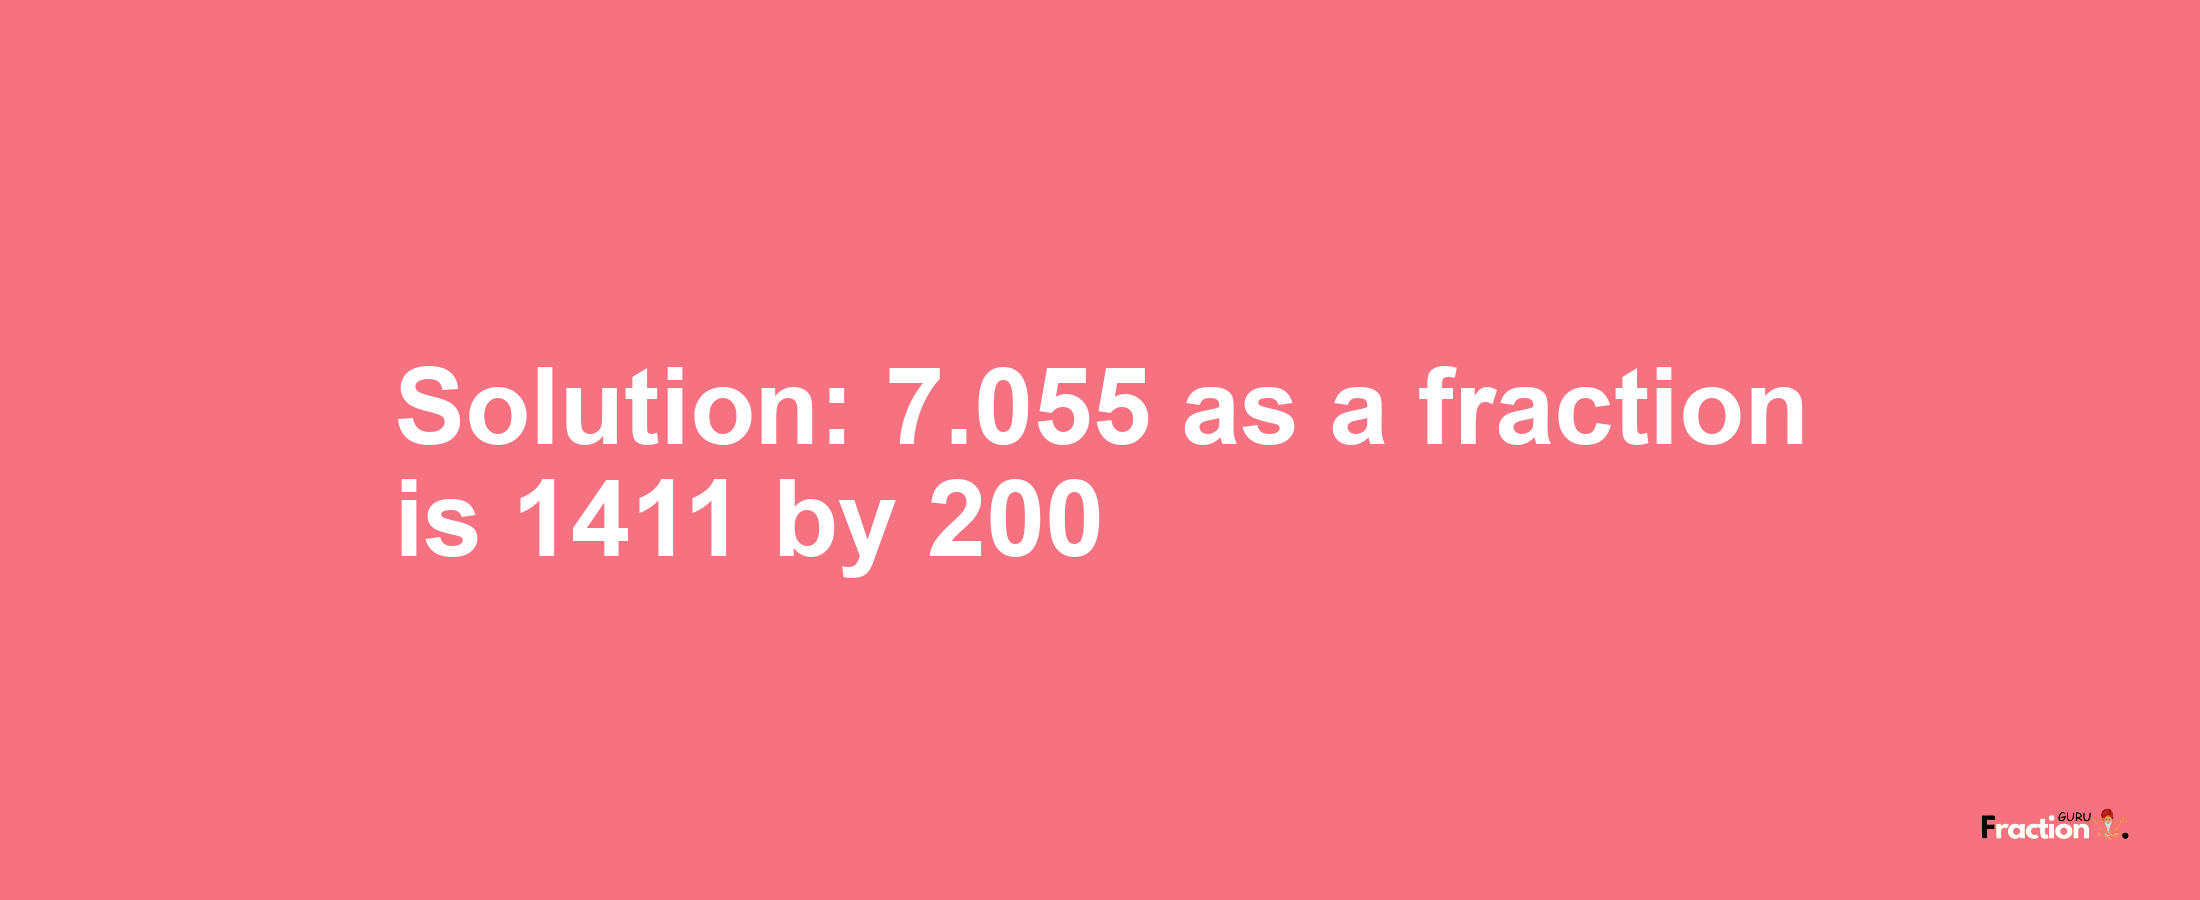 Solution:7.055 as a fraction is 1411/200